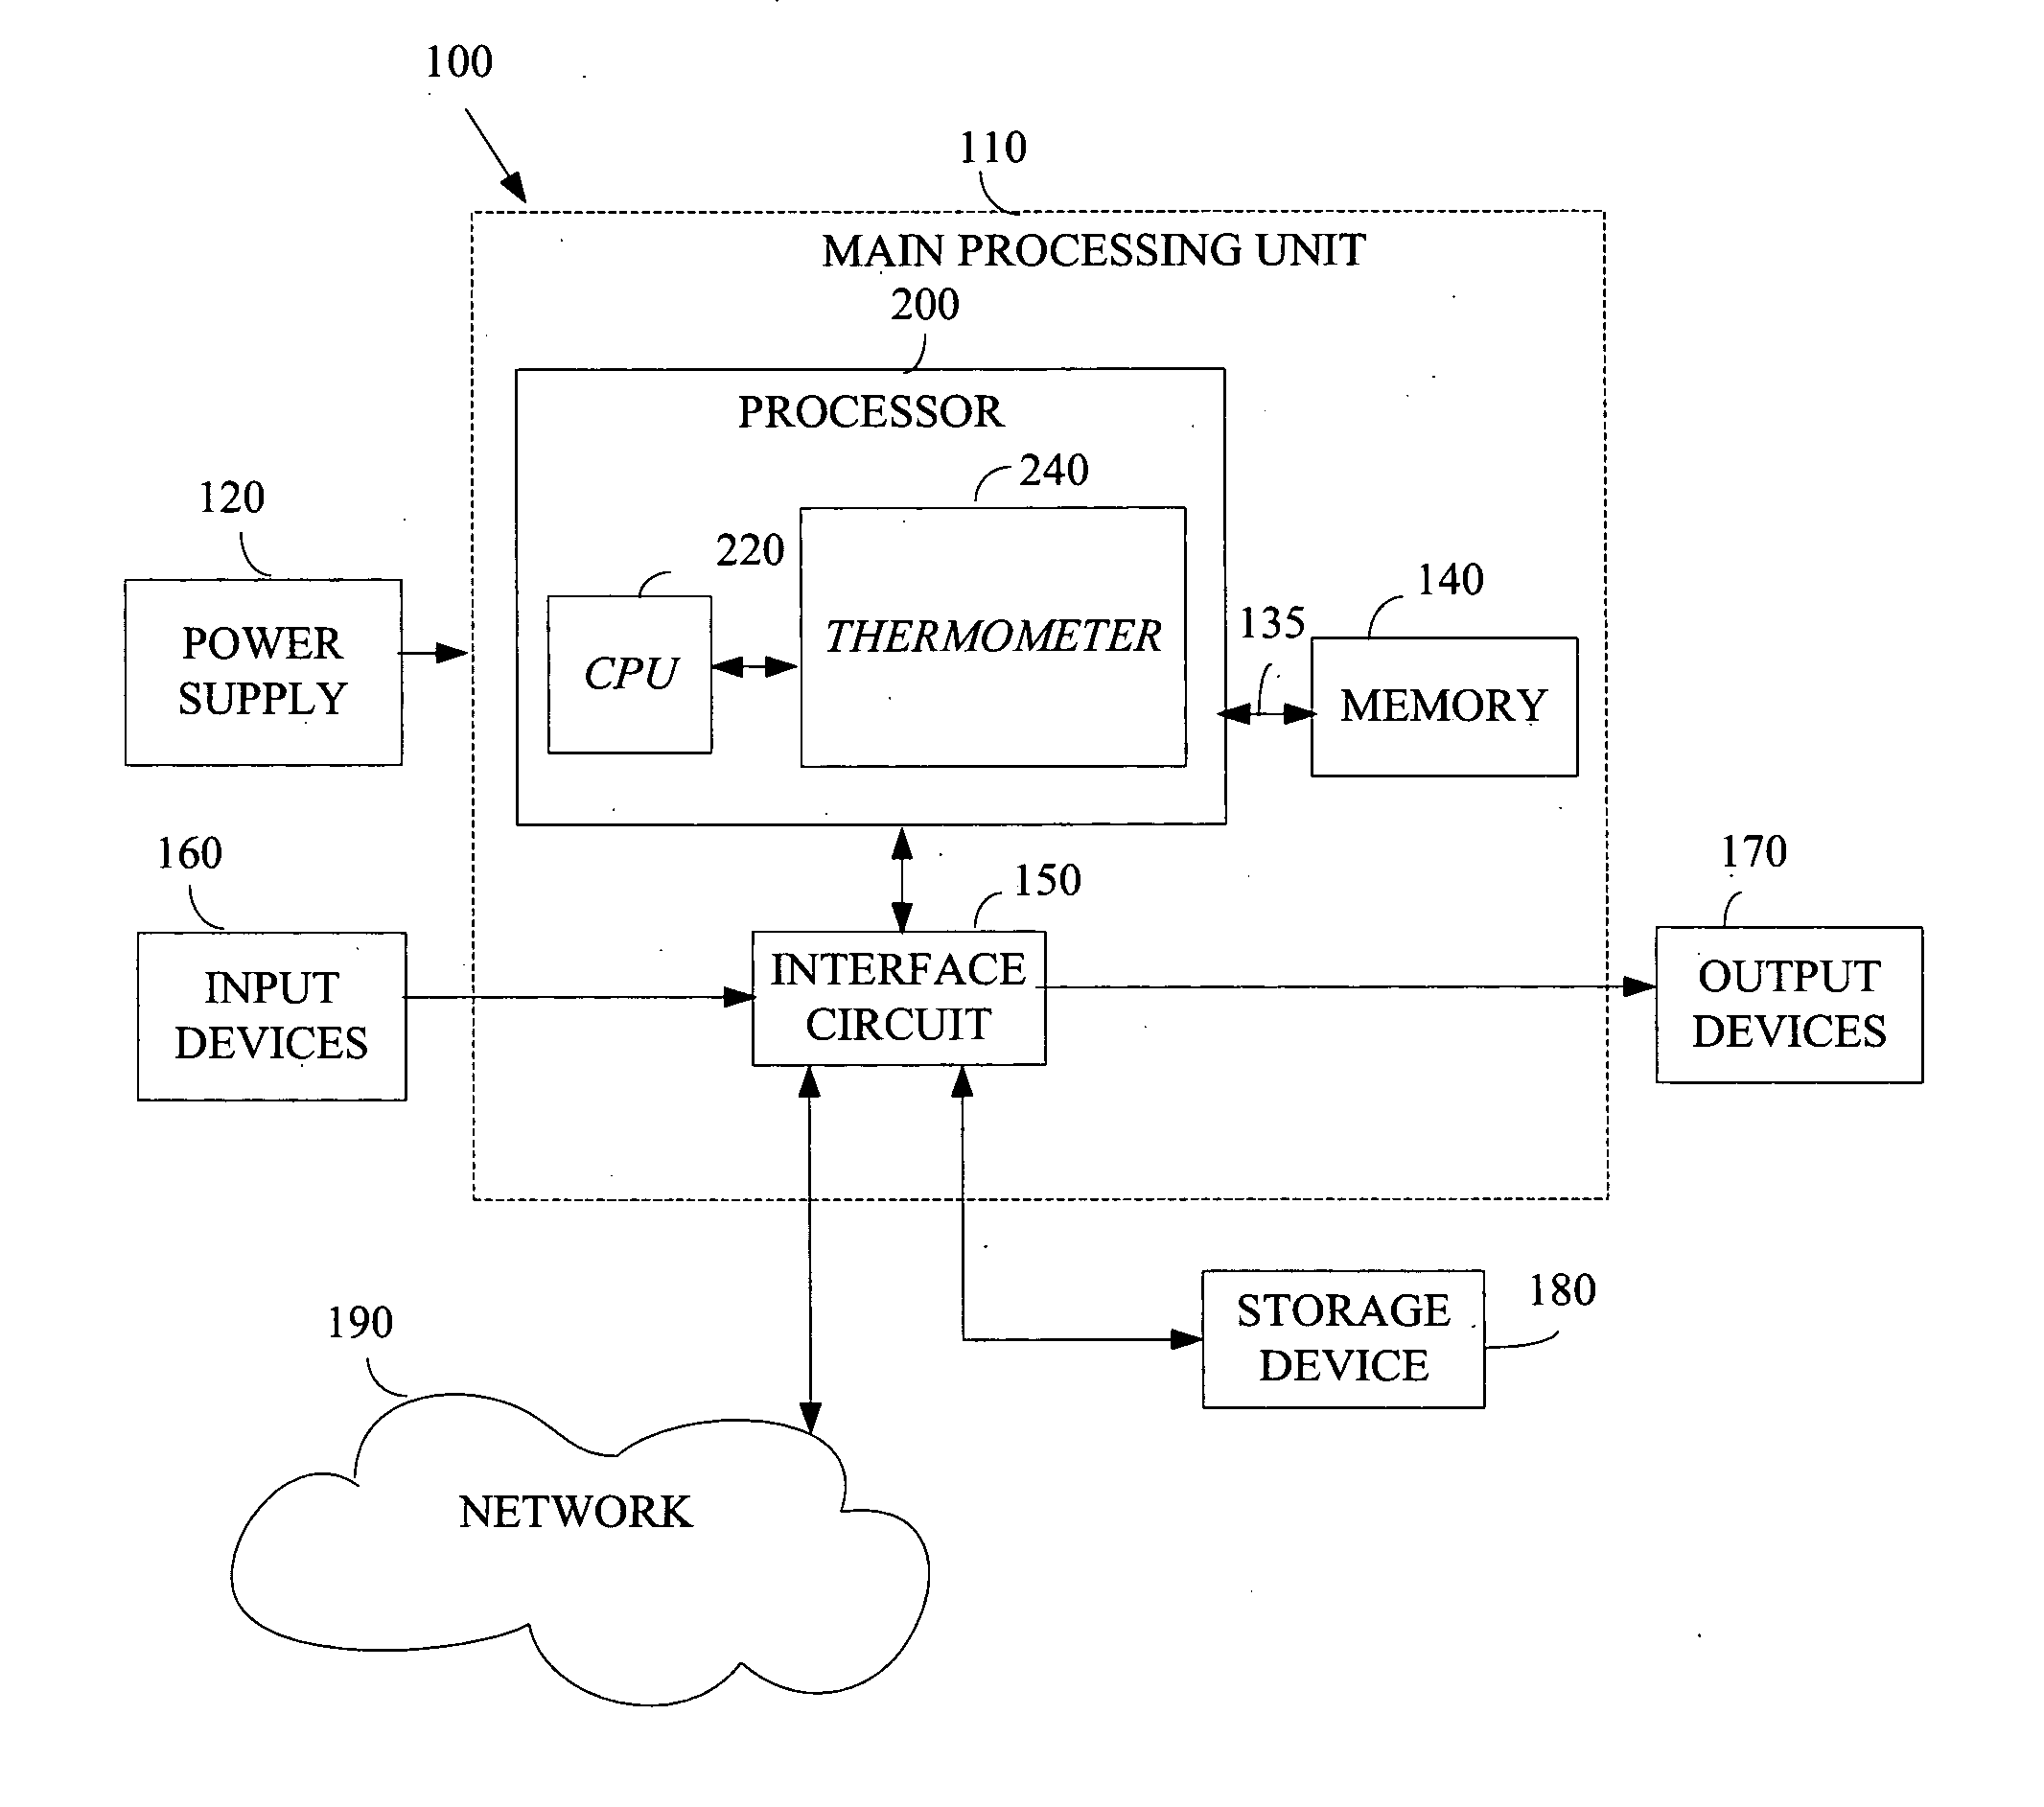 Method and apparatus to calibrate thermometer